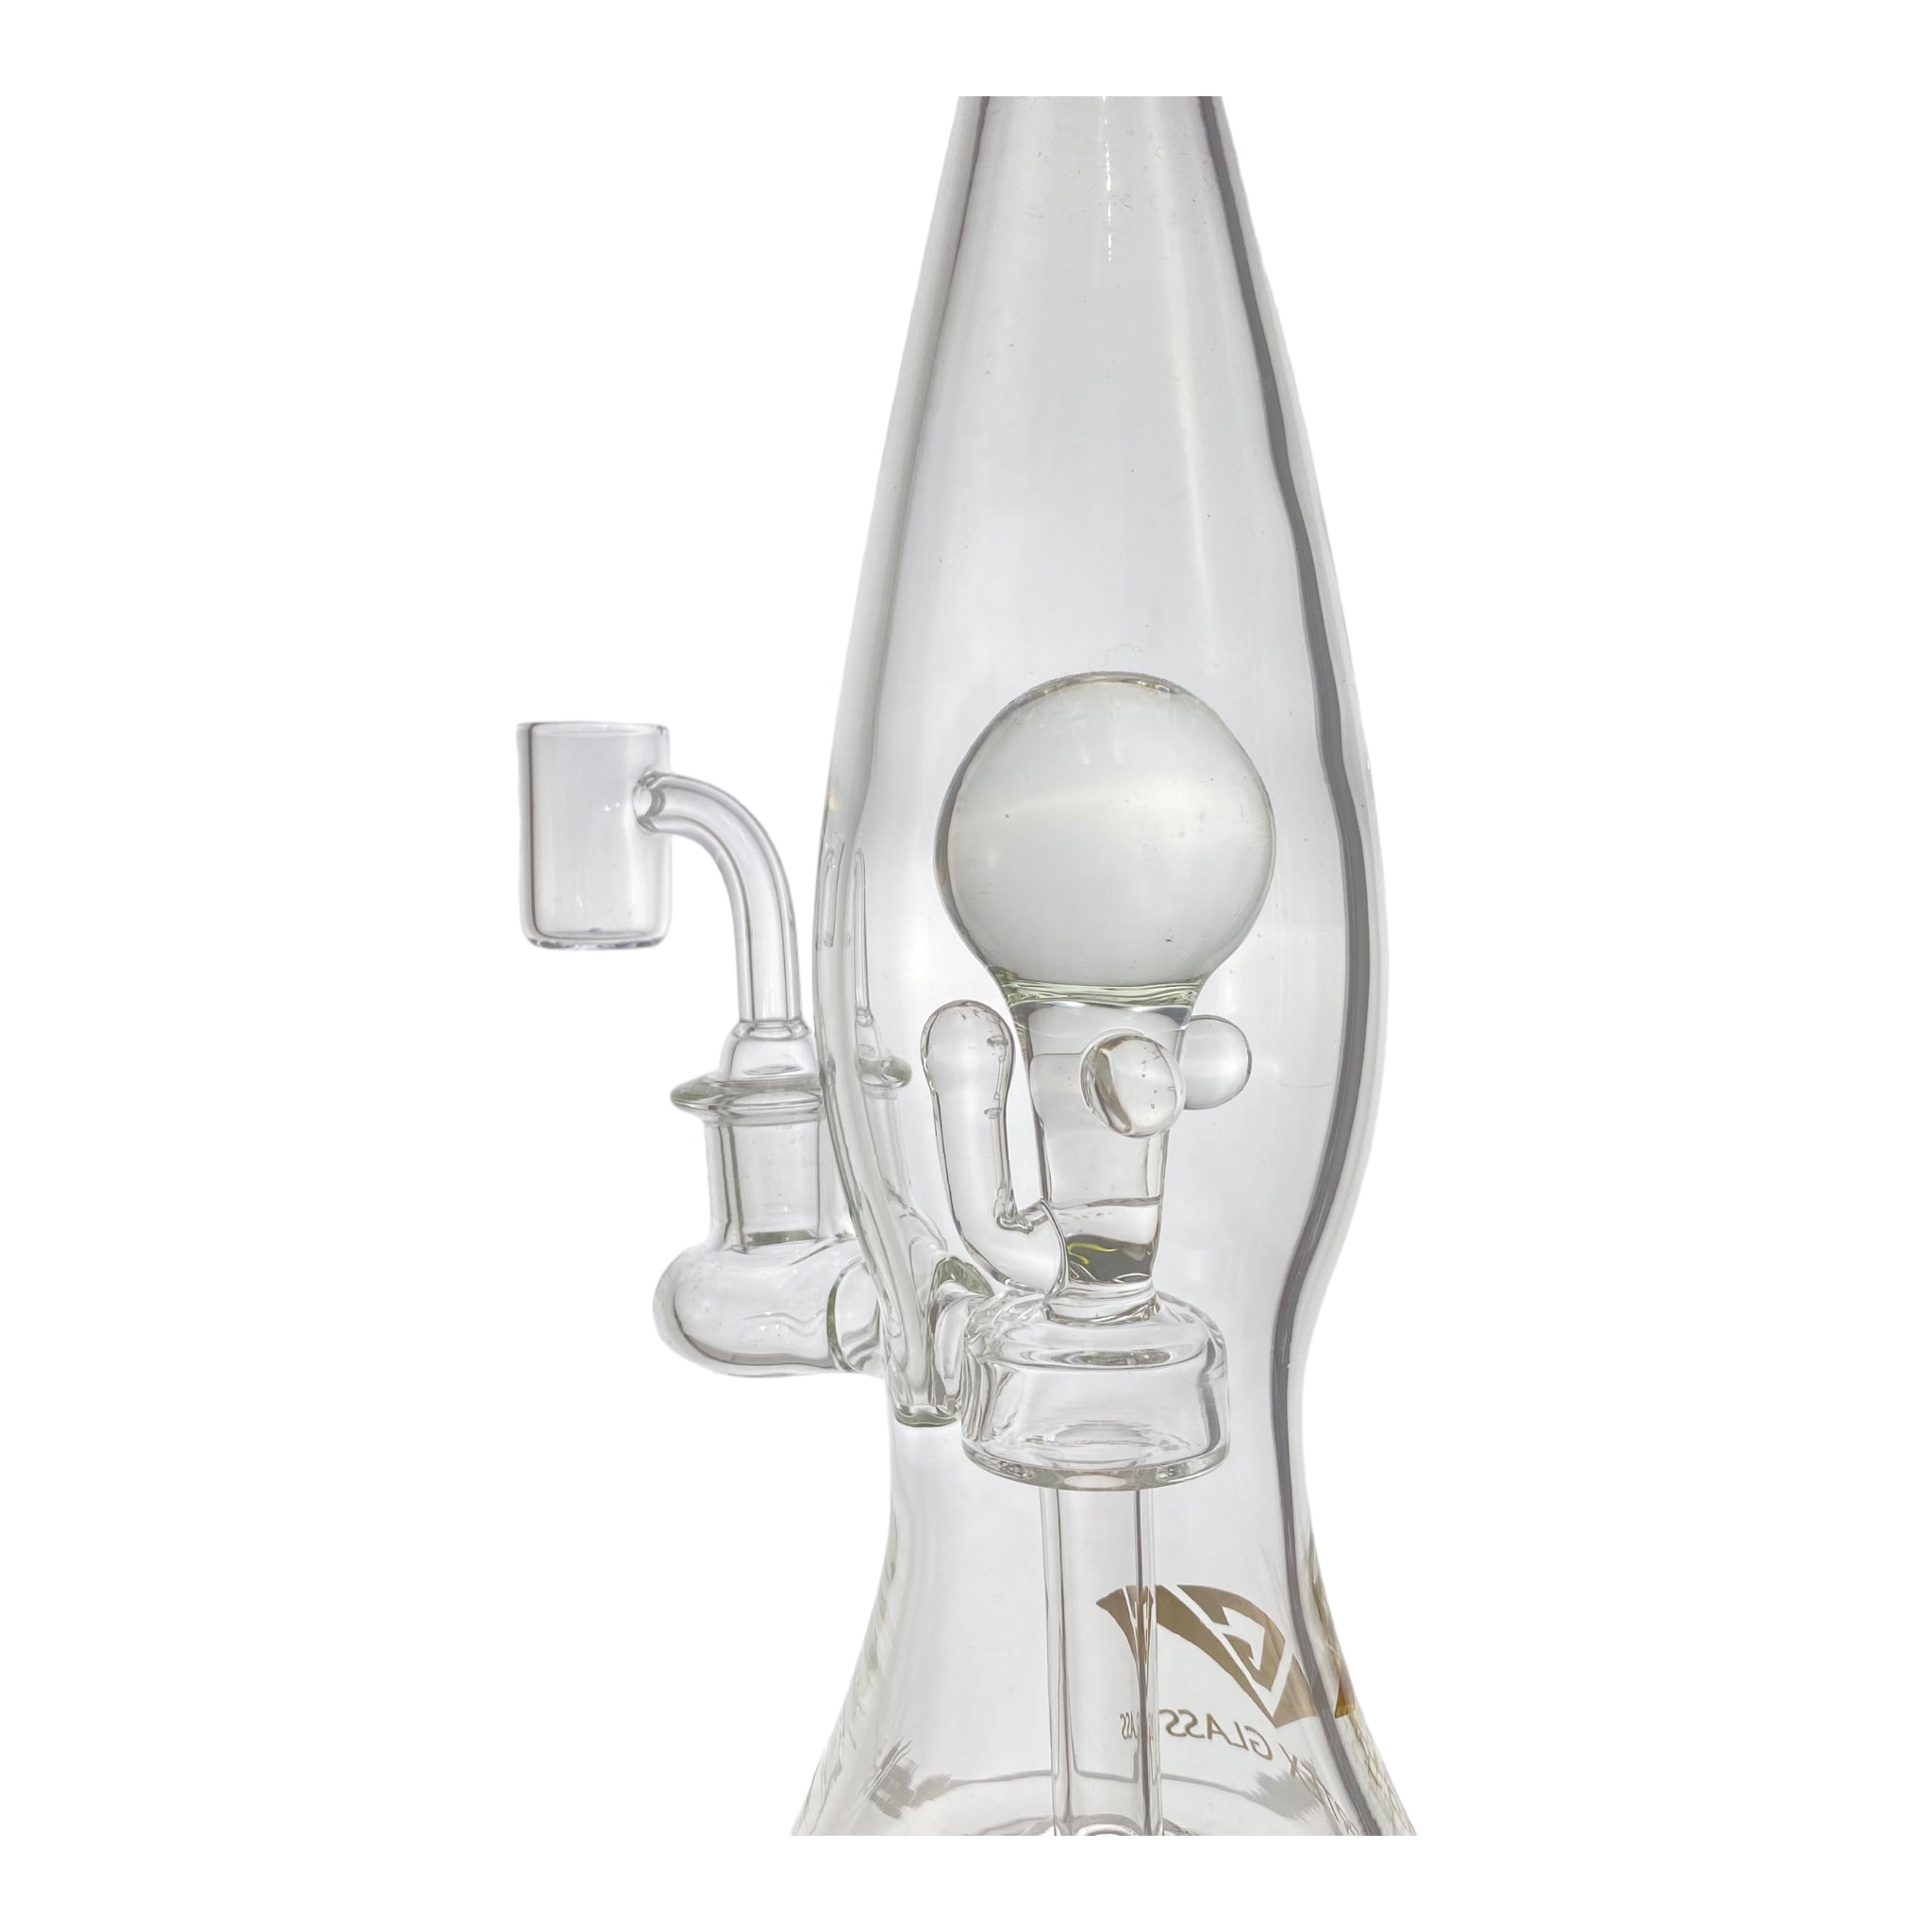 Vertex Glass - Clear Lamp Shape Dab Rig With Clear Molten Marbles Inside